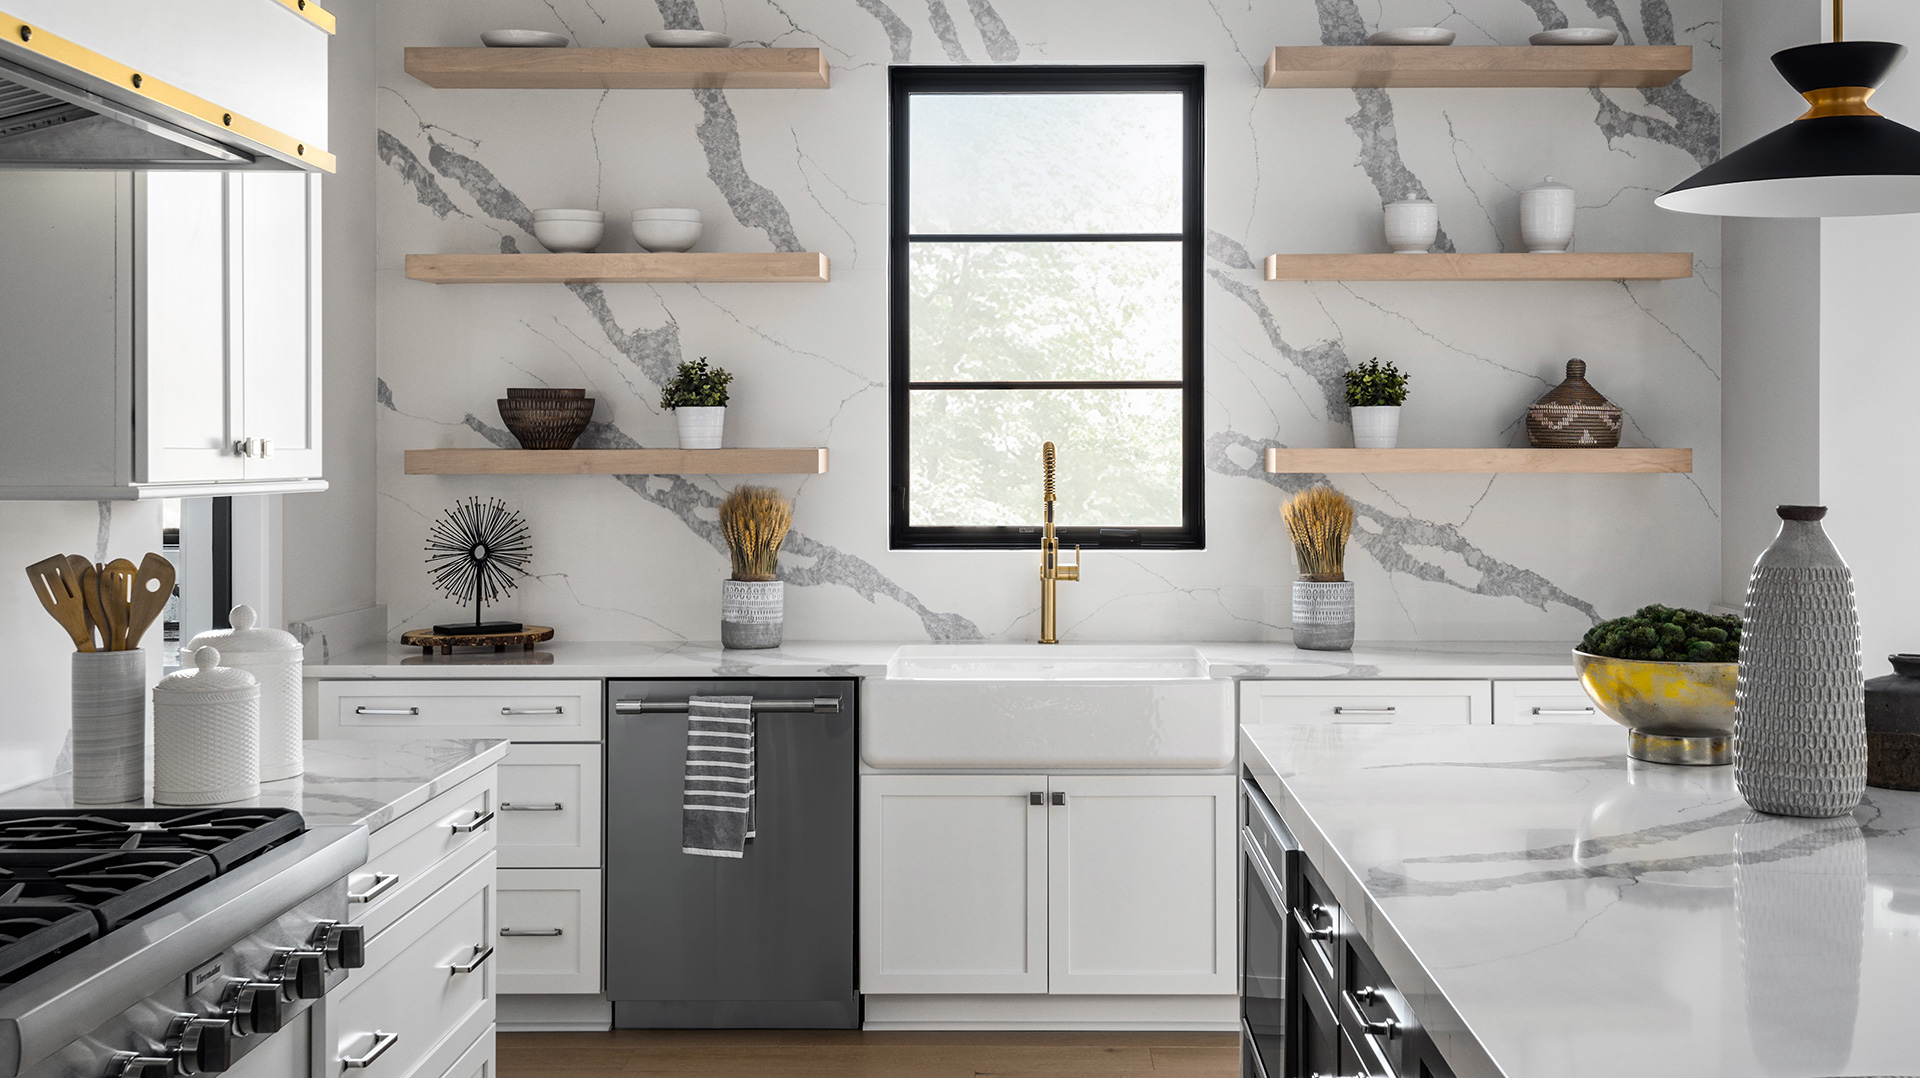 An accent wall of Q Premium Natural Quartz with floating natural wood shelves, farmhouse-style sink, and matching countertop. Quartz kitchen island and professional cooktop in the foreground.